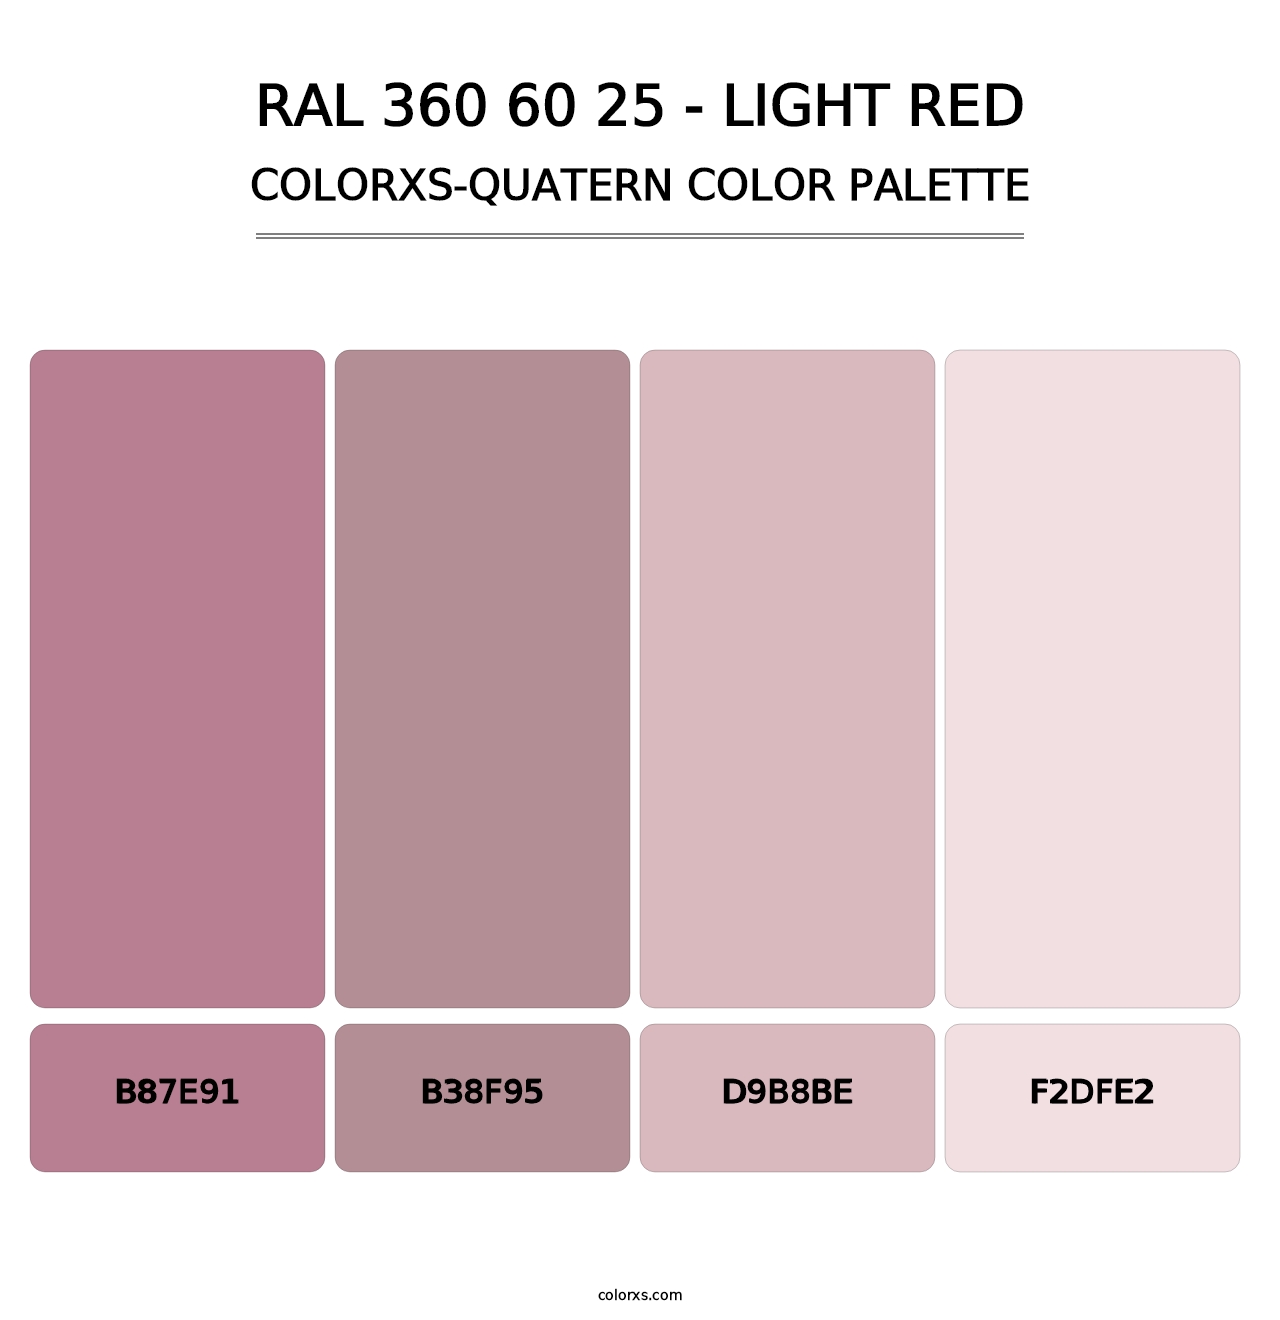 RAL 360 60 25 - Light Red - Colorxs Quatern Palette